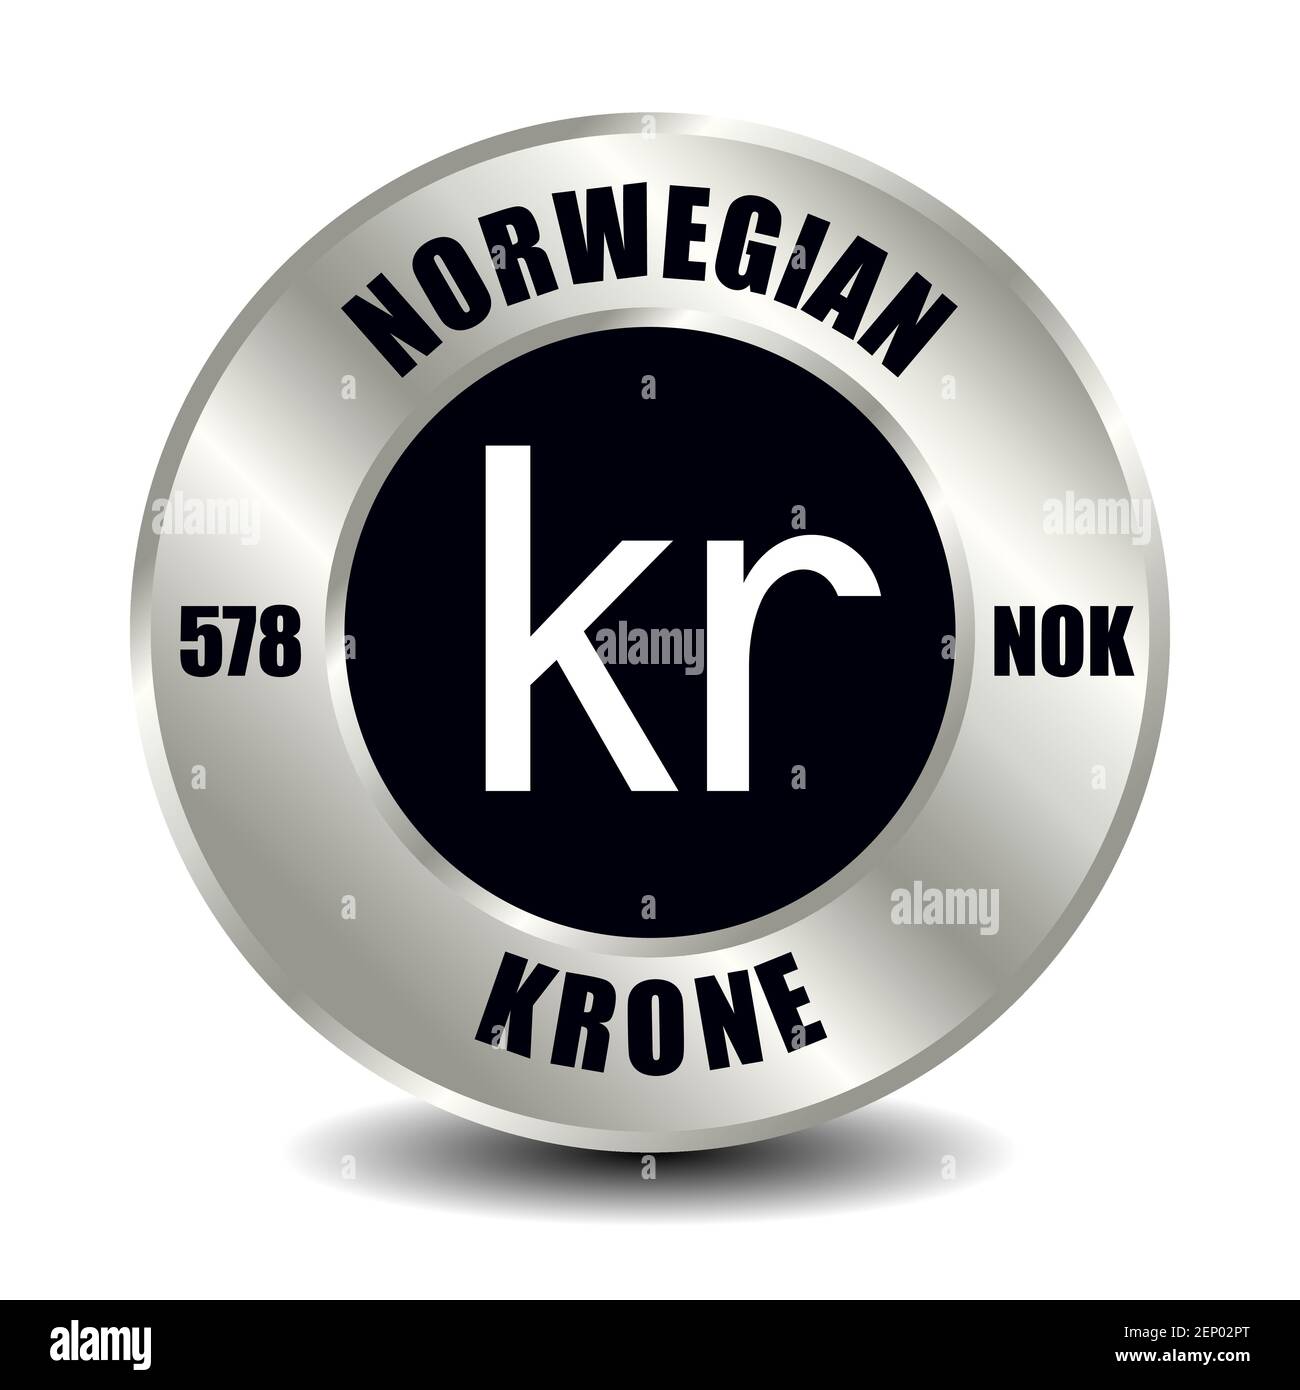 Norway money icon isolated on round silver coin. Vector sign of currency symbol with international ISO code and abbreviation Stock Vector